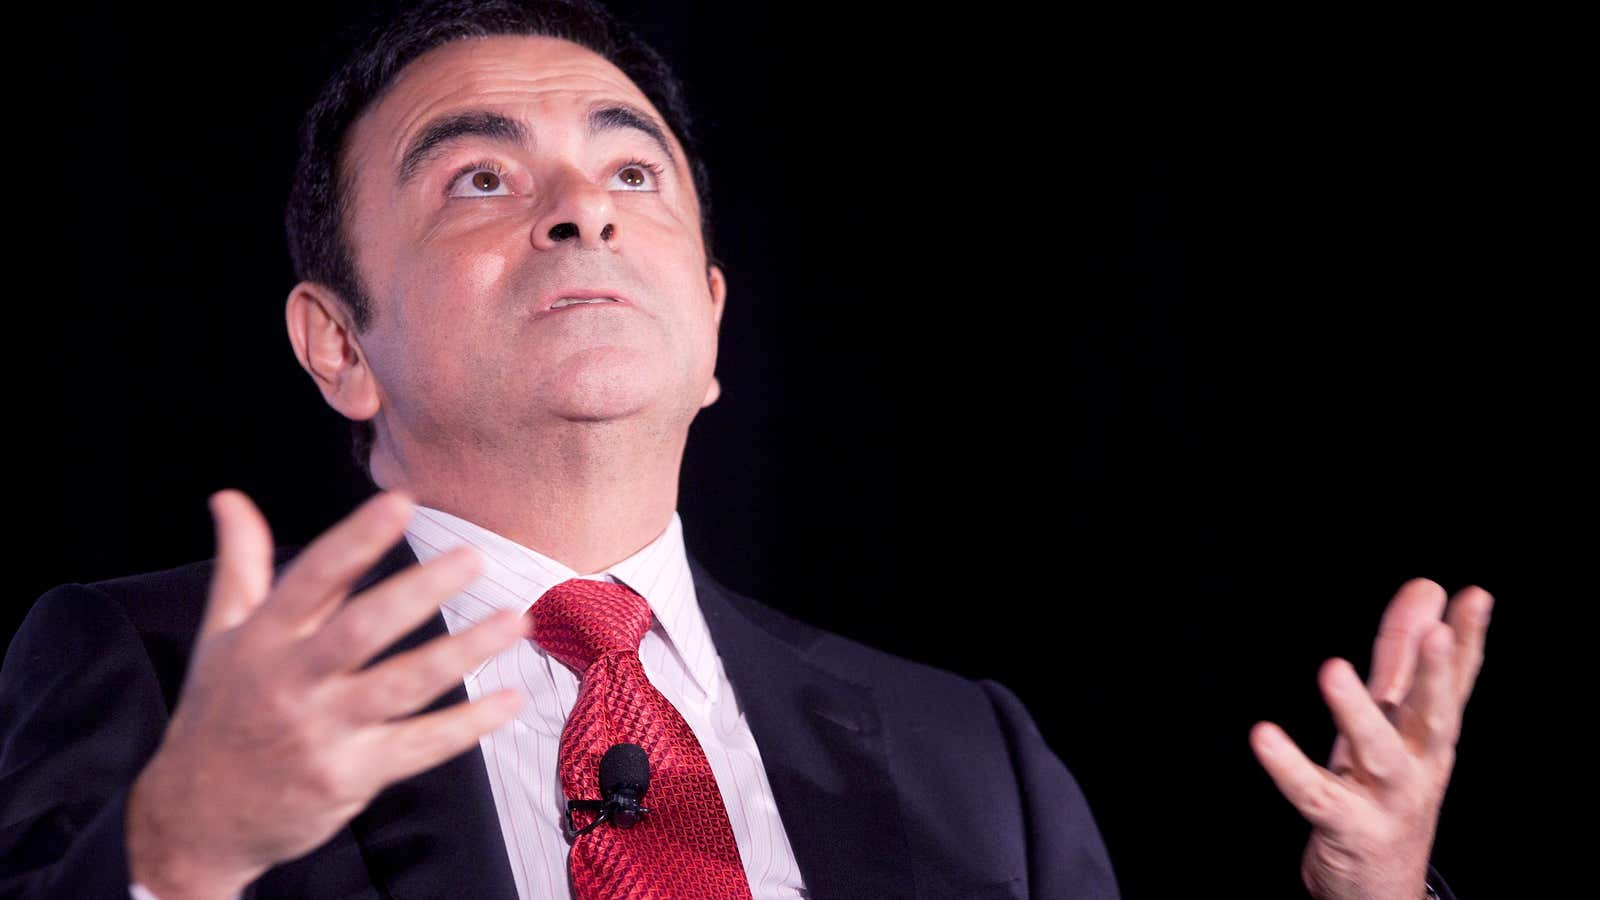 Renault CEO Carlos Ghosn, who may need divine inspiration